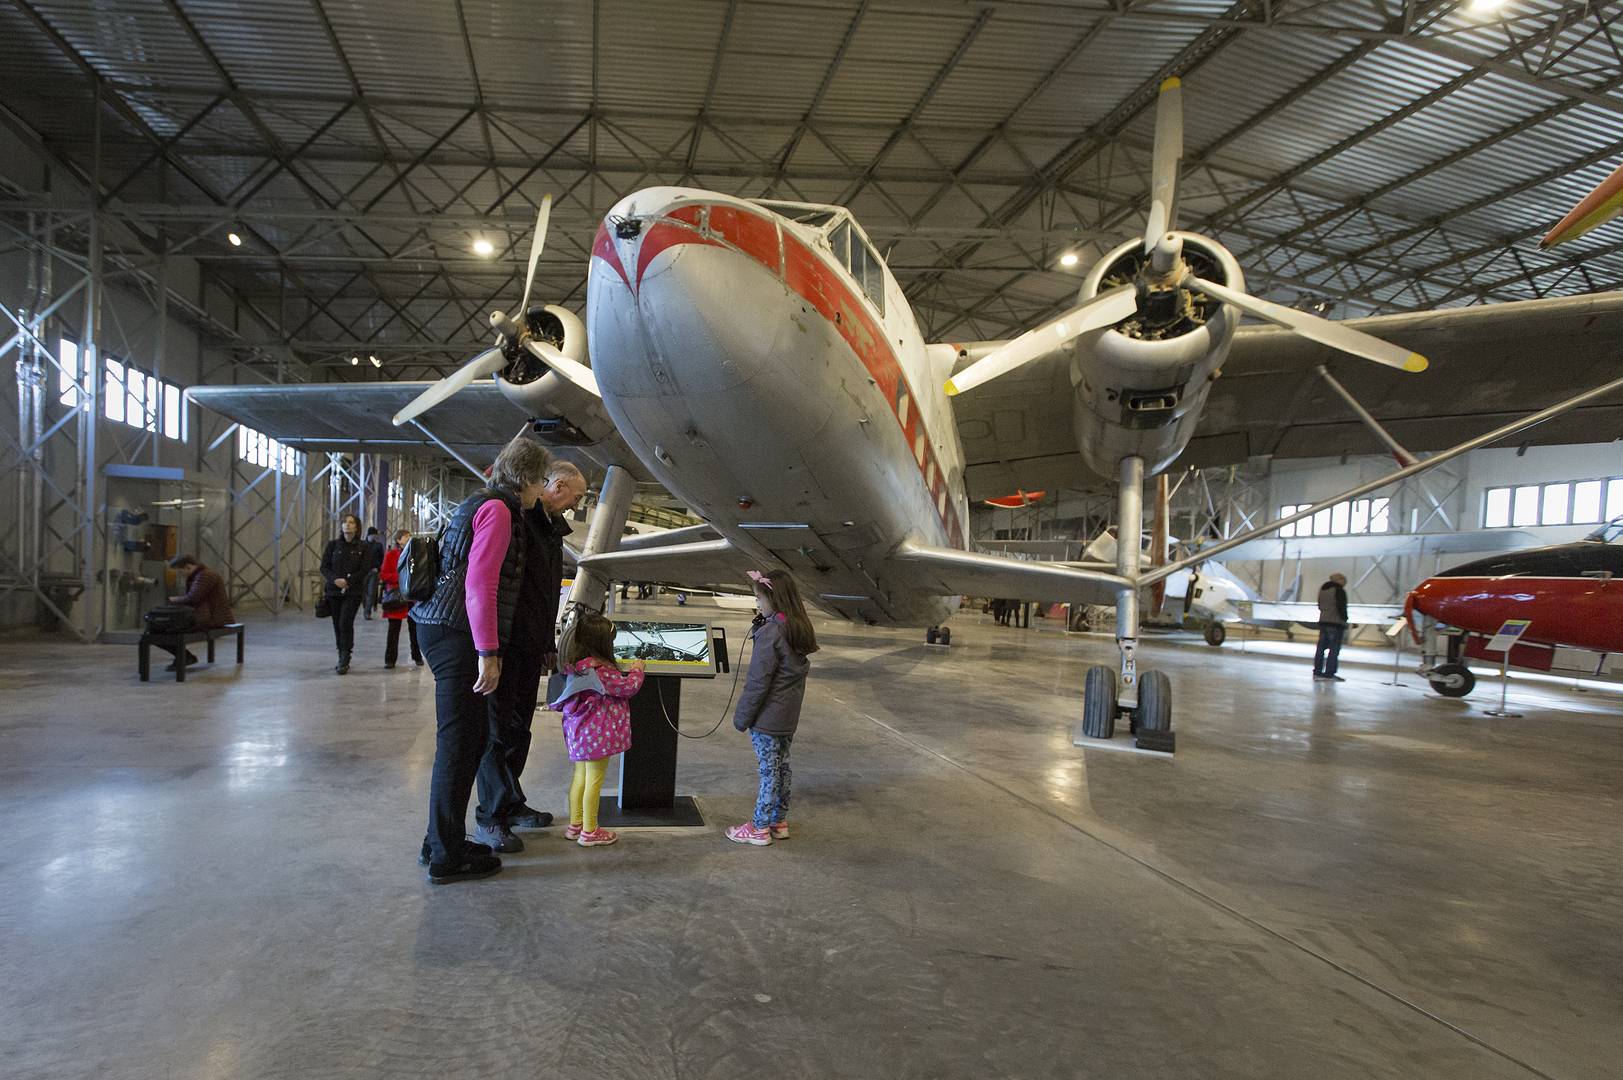 A family look at an interactive AV beside an aircraft in the Civil Aviation hangar at the National Museum of Flight , Image © Ruth Armstrong Photography